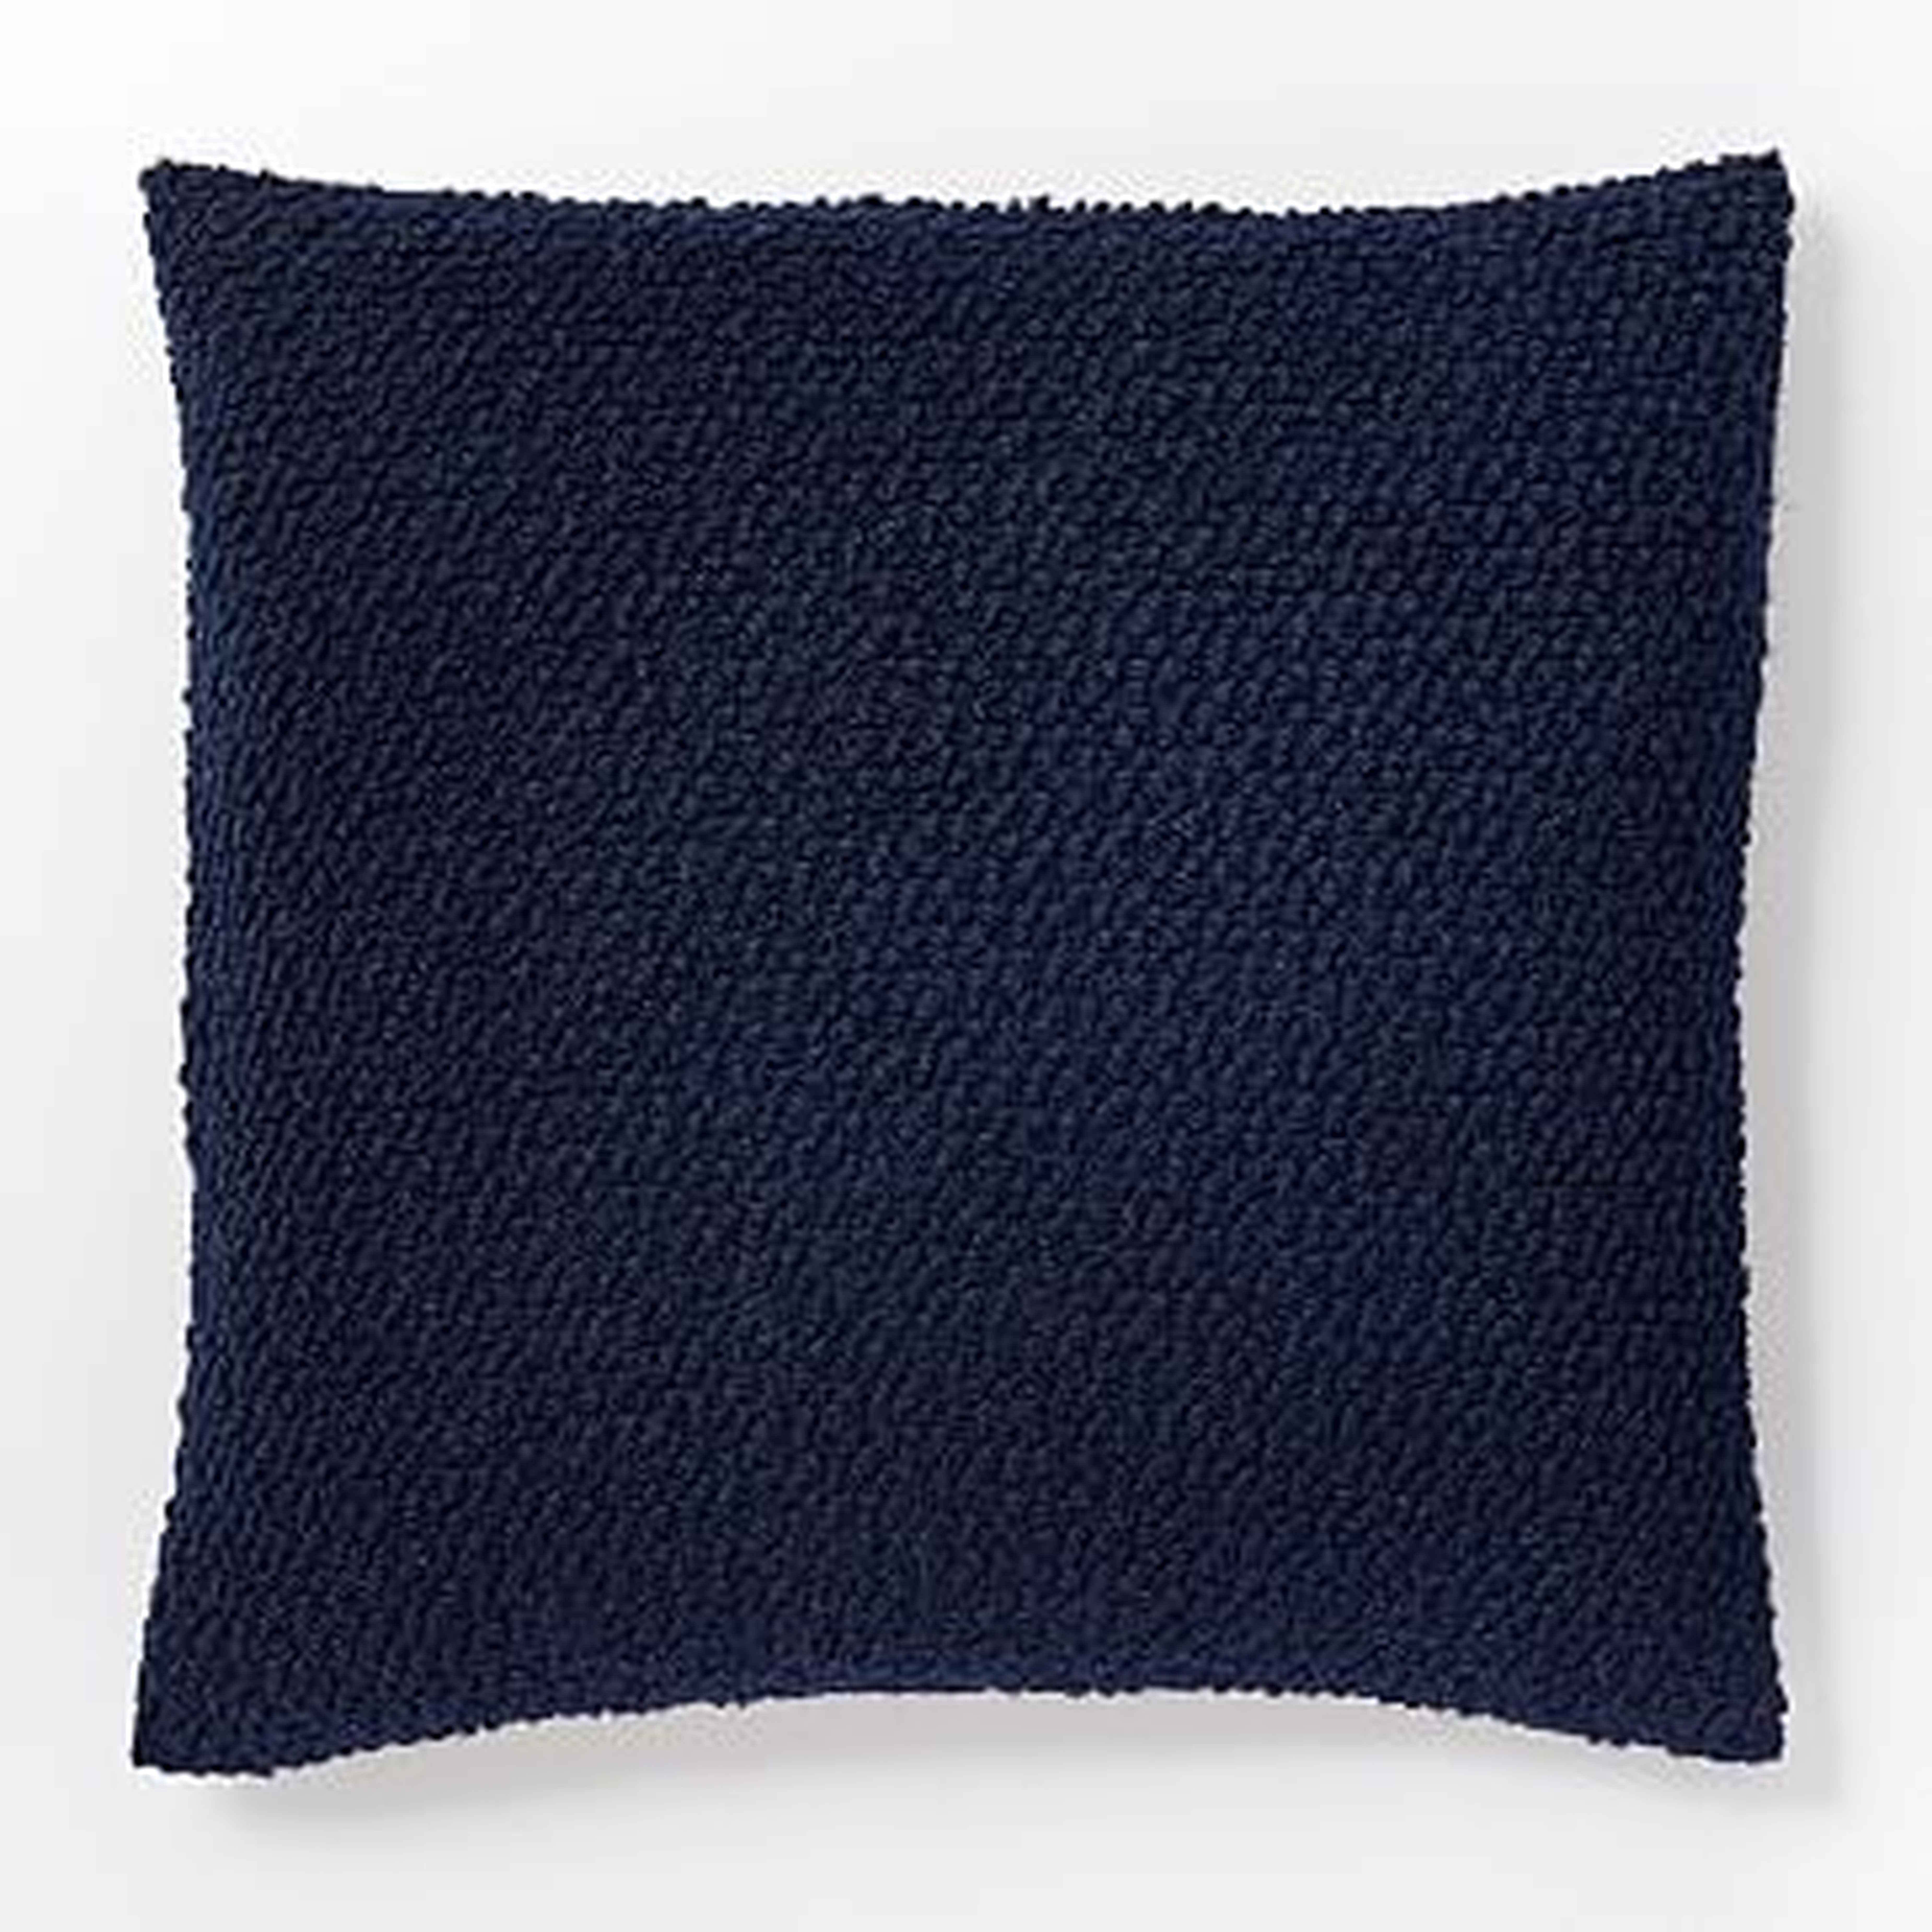 Cozy Boucle Pillow Cover, 18"x18", Nightshade - West Elm